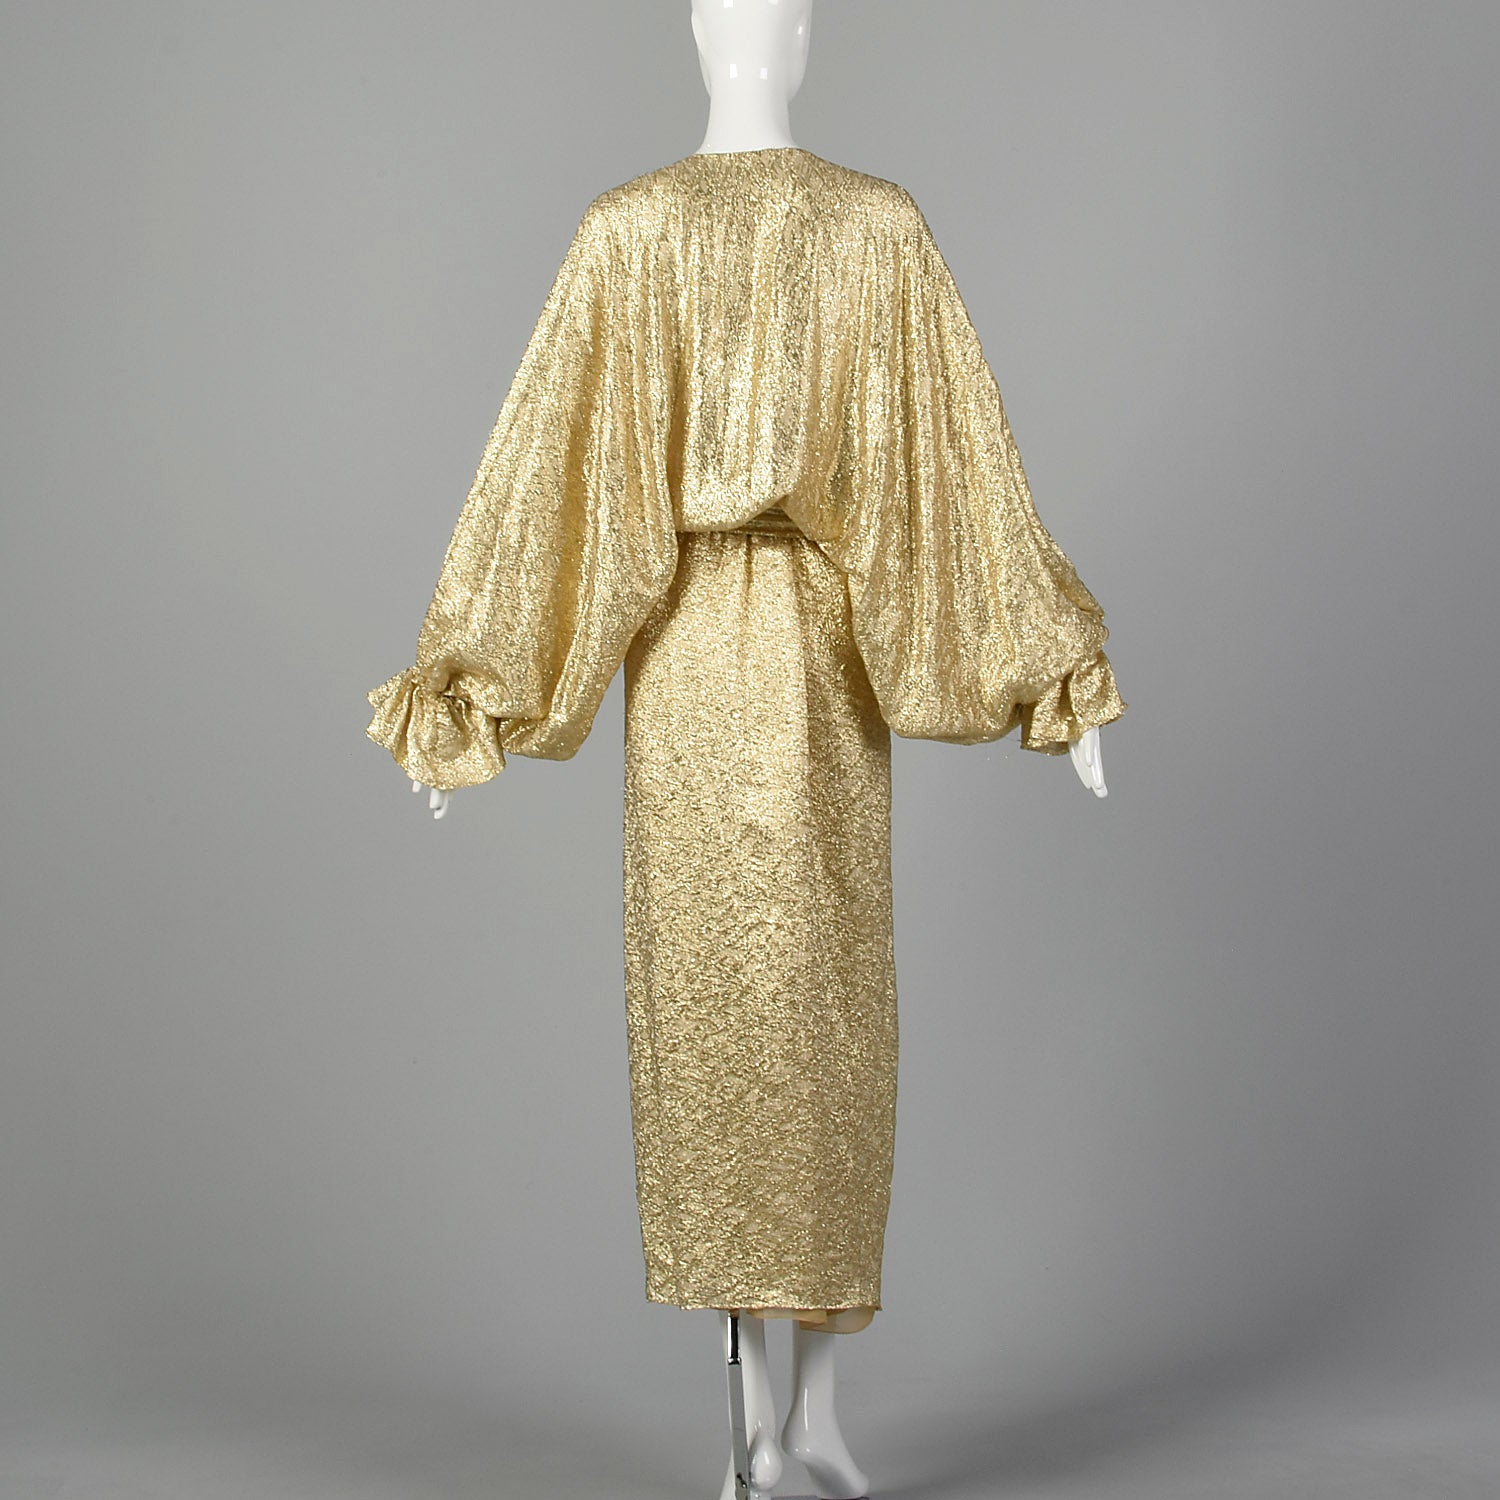 1970s Metallic Gold Evening Dress with Balloon Sleeves